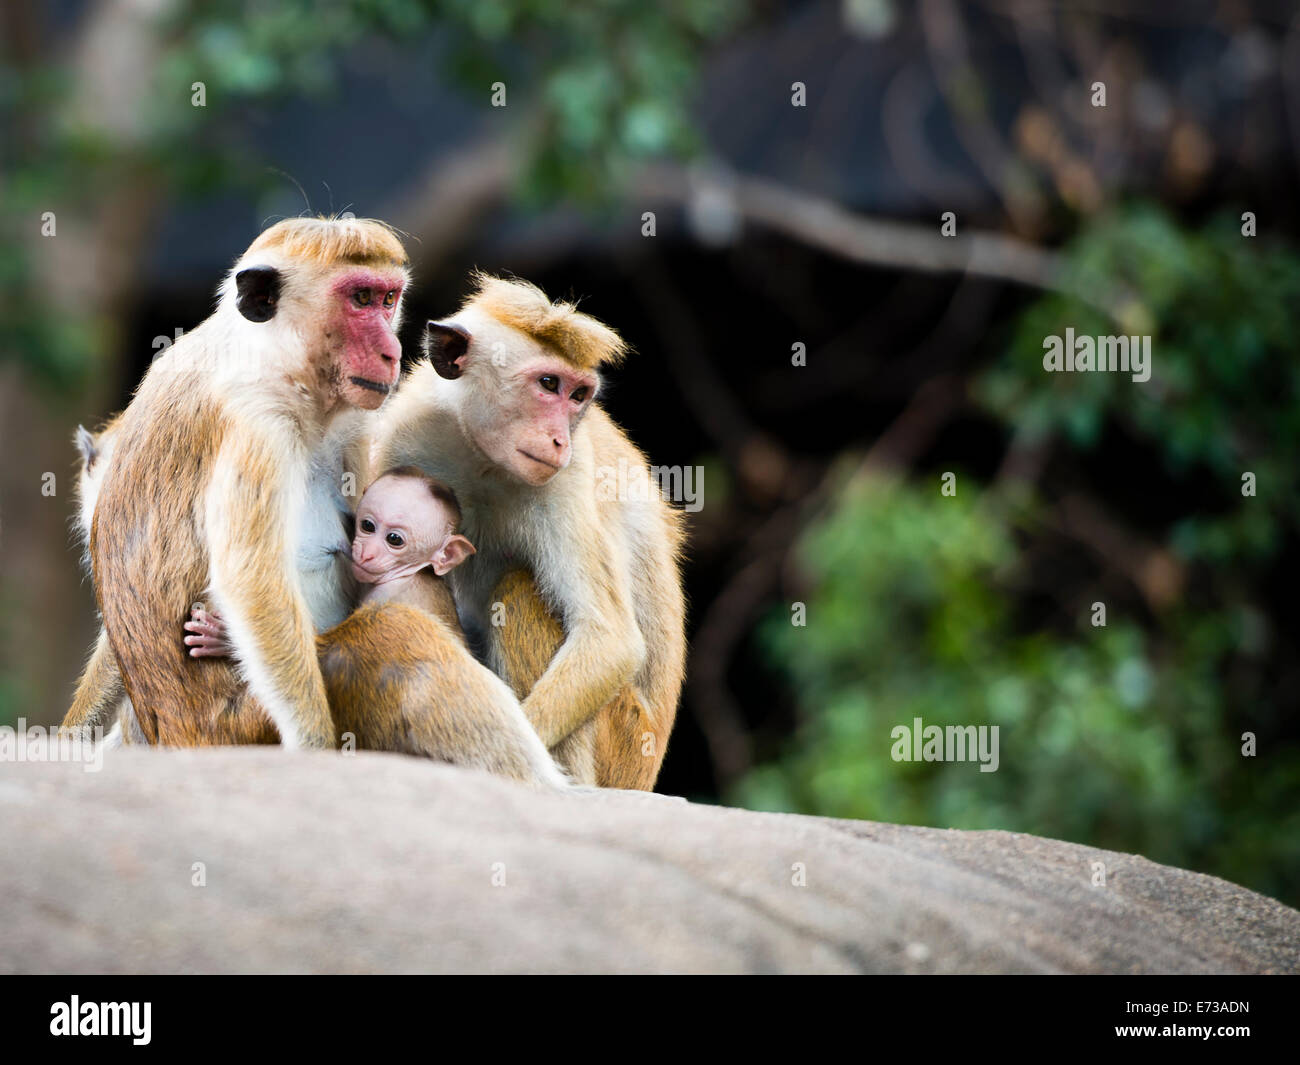 Family of Macaque monkeys, breastfeeding their young one. Photographed using Nikon-D800E. Stock Photo